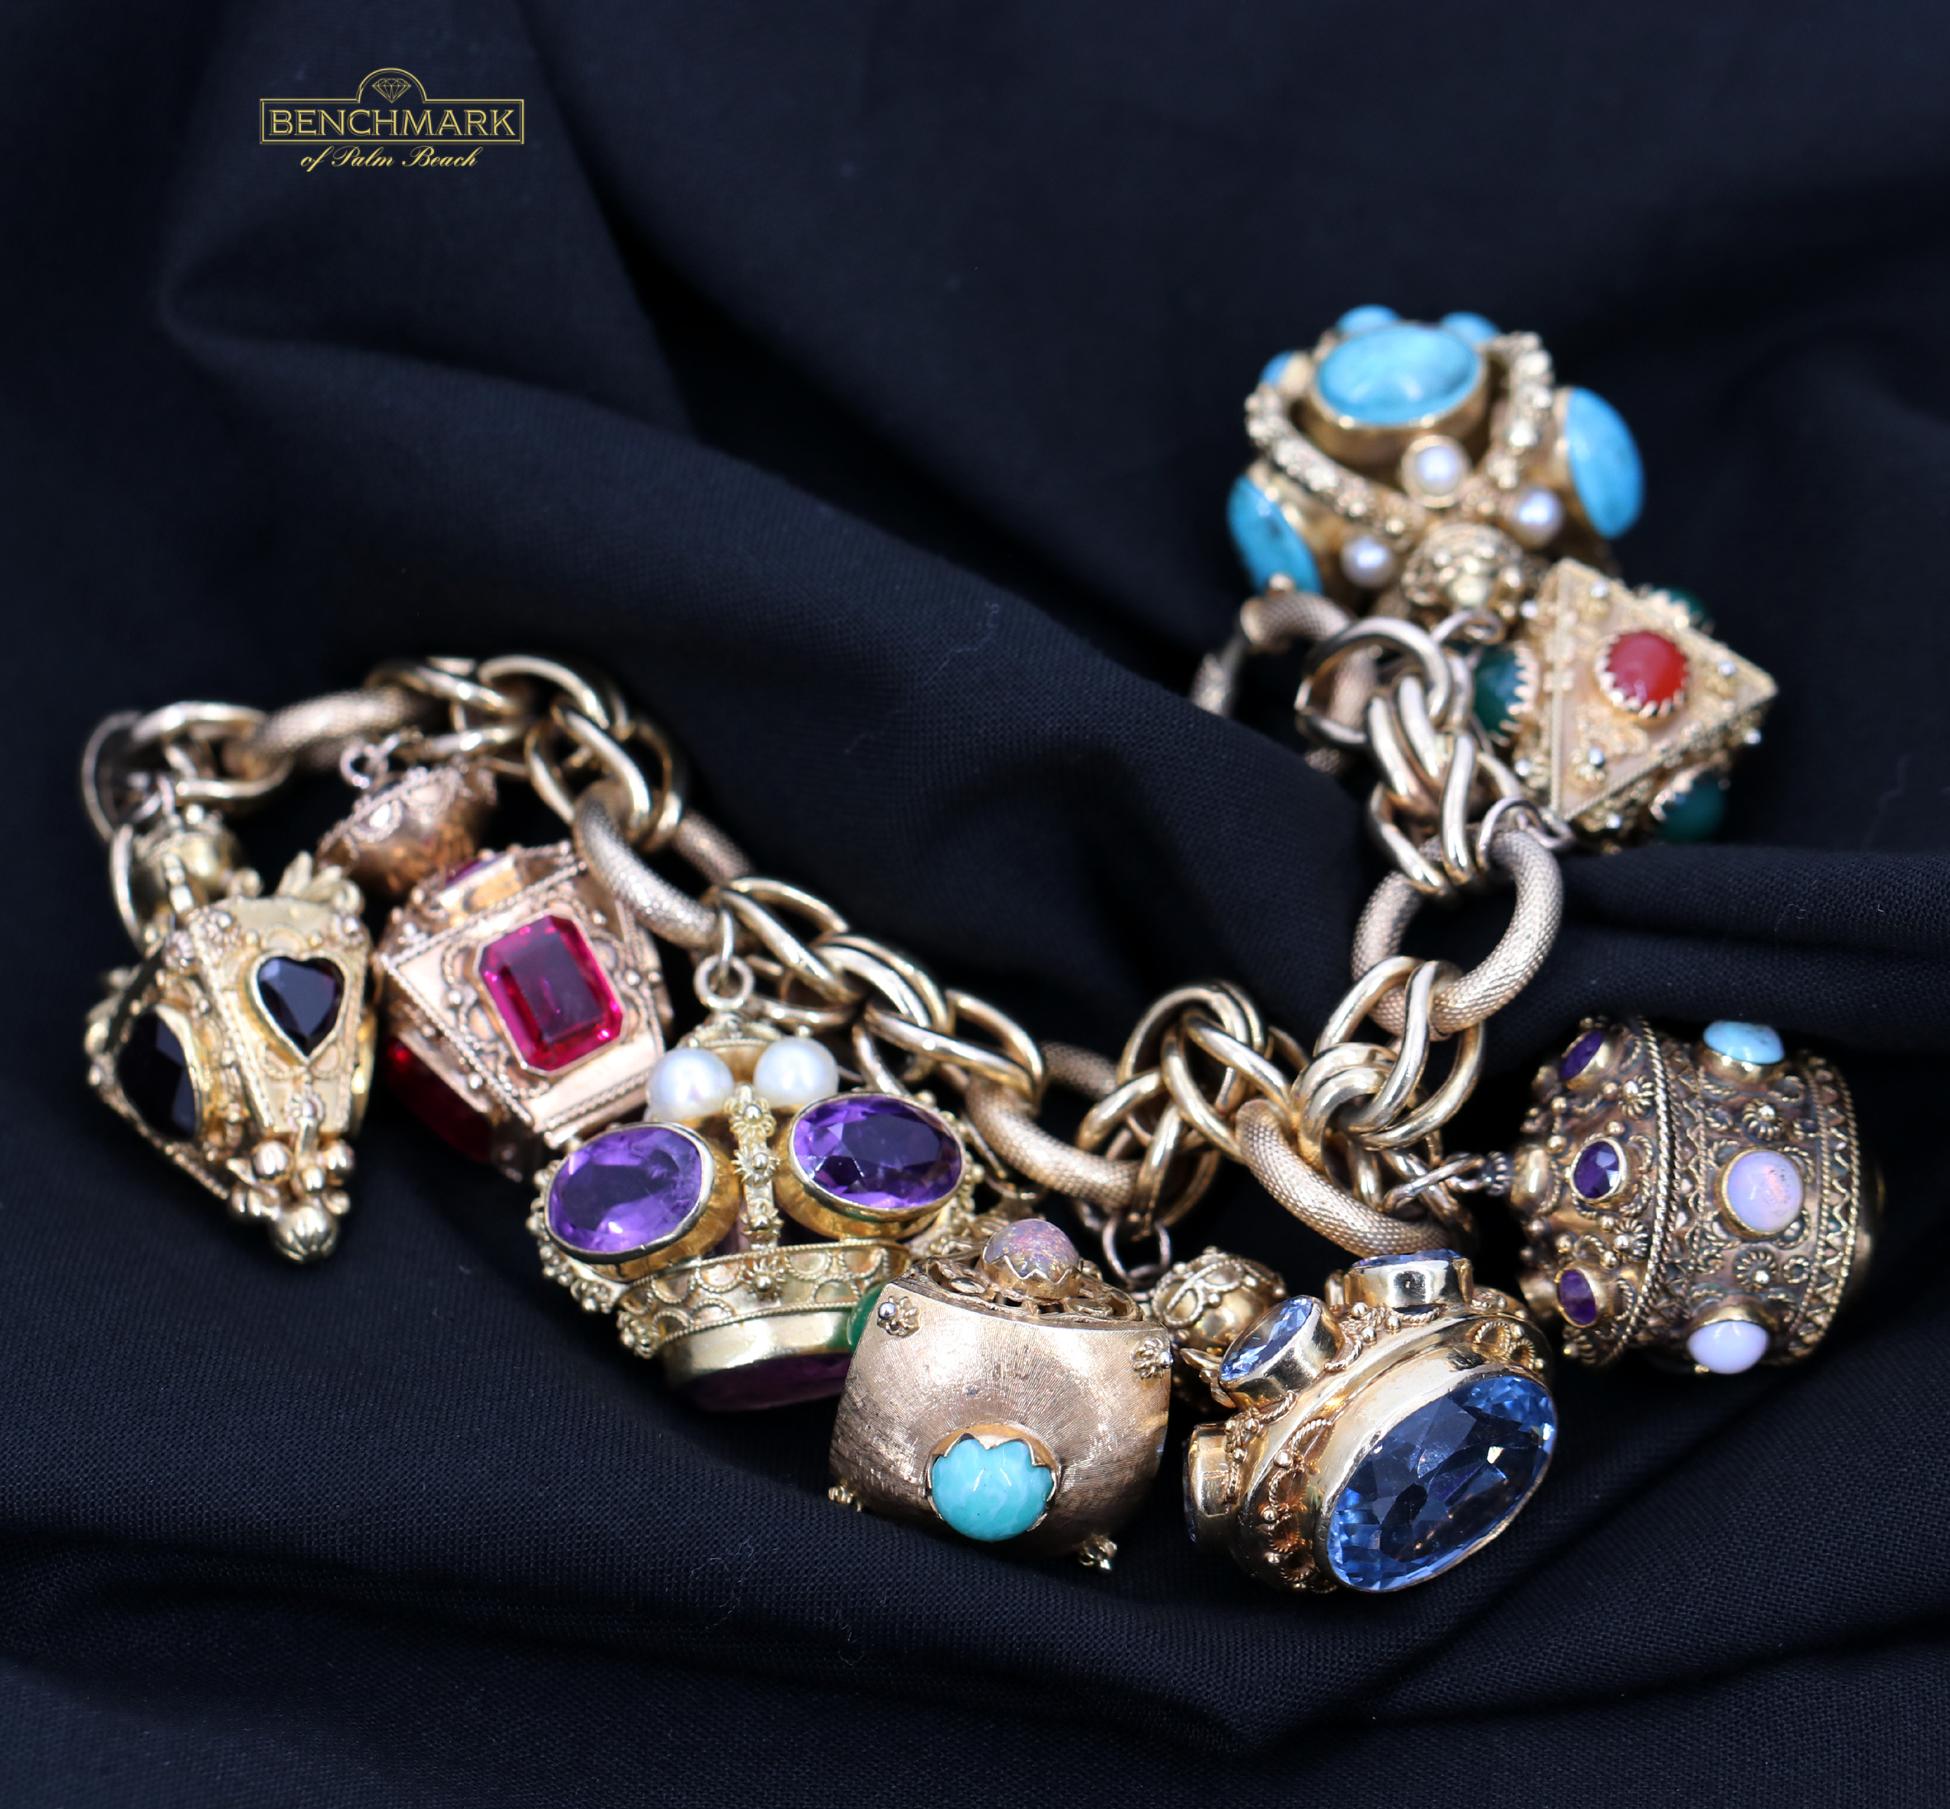 An 18K yellow gold bracelet measuring eight inches long, with eight Etruscan revival style charms. These wonderful charms include one that opens set with amethyst, citrine, and opal. Two charms are set with amethyst, pearls, and turquoise, and five